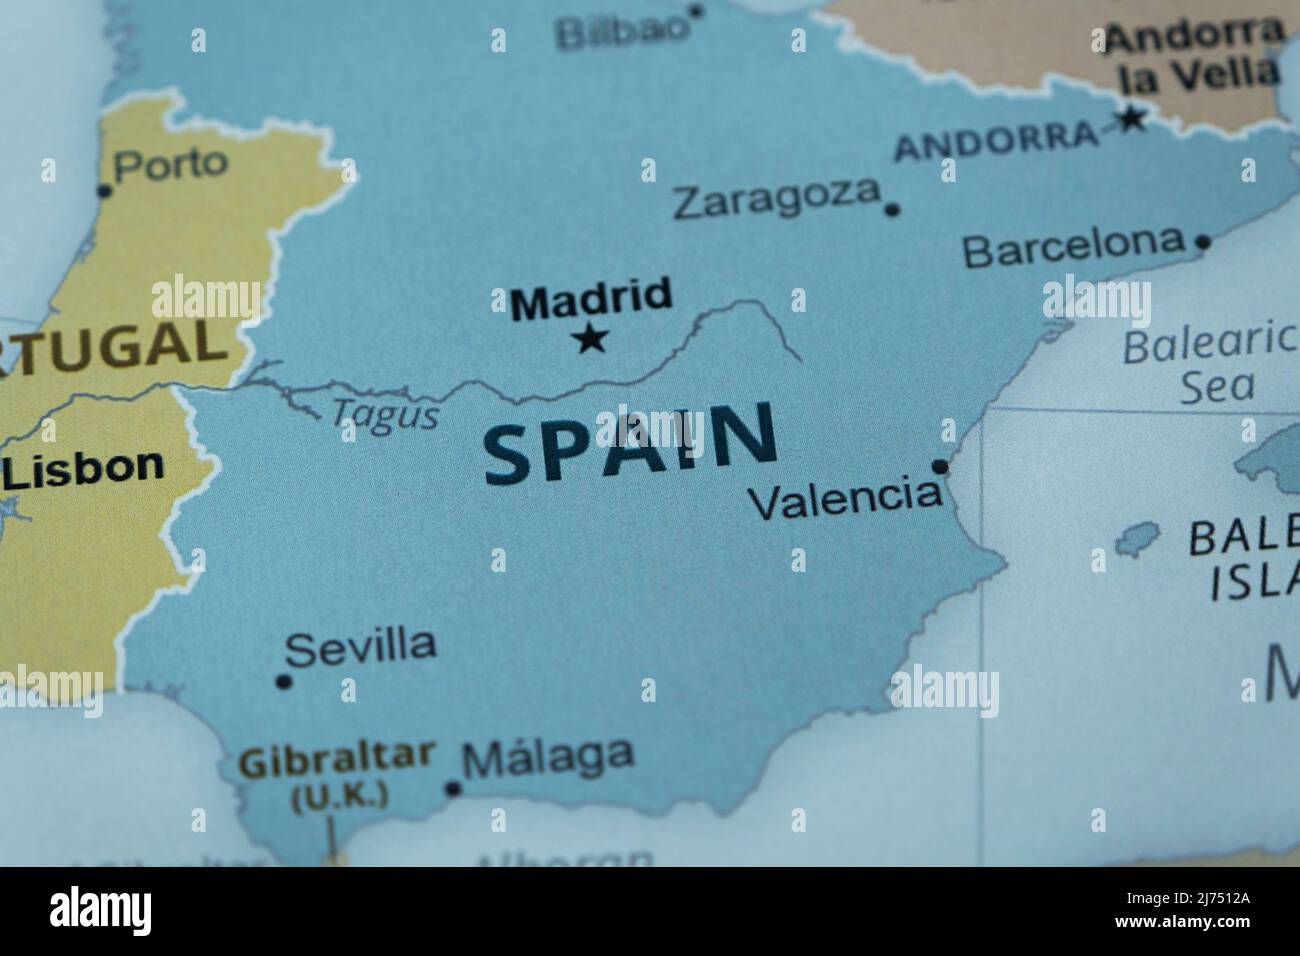 Spain country and location on map, macro shot and close-up of Spain on map, travel idea, vacation concept, Spanish culture, South Europe destination Stock Photo